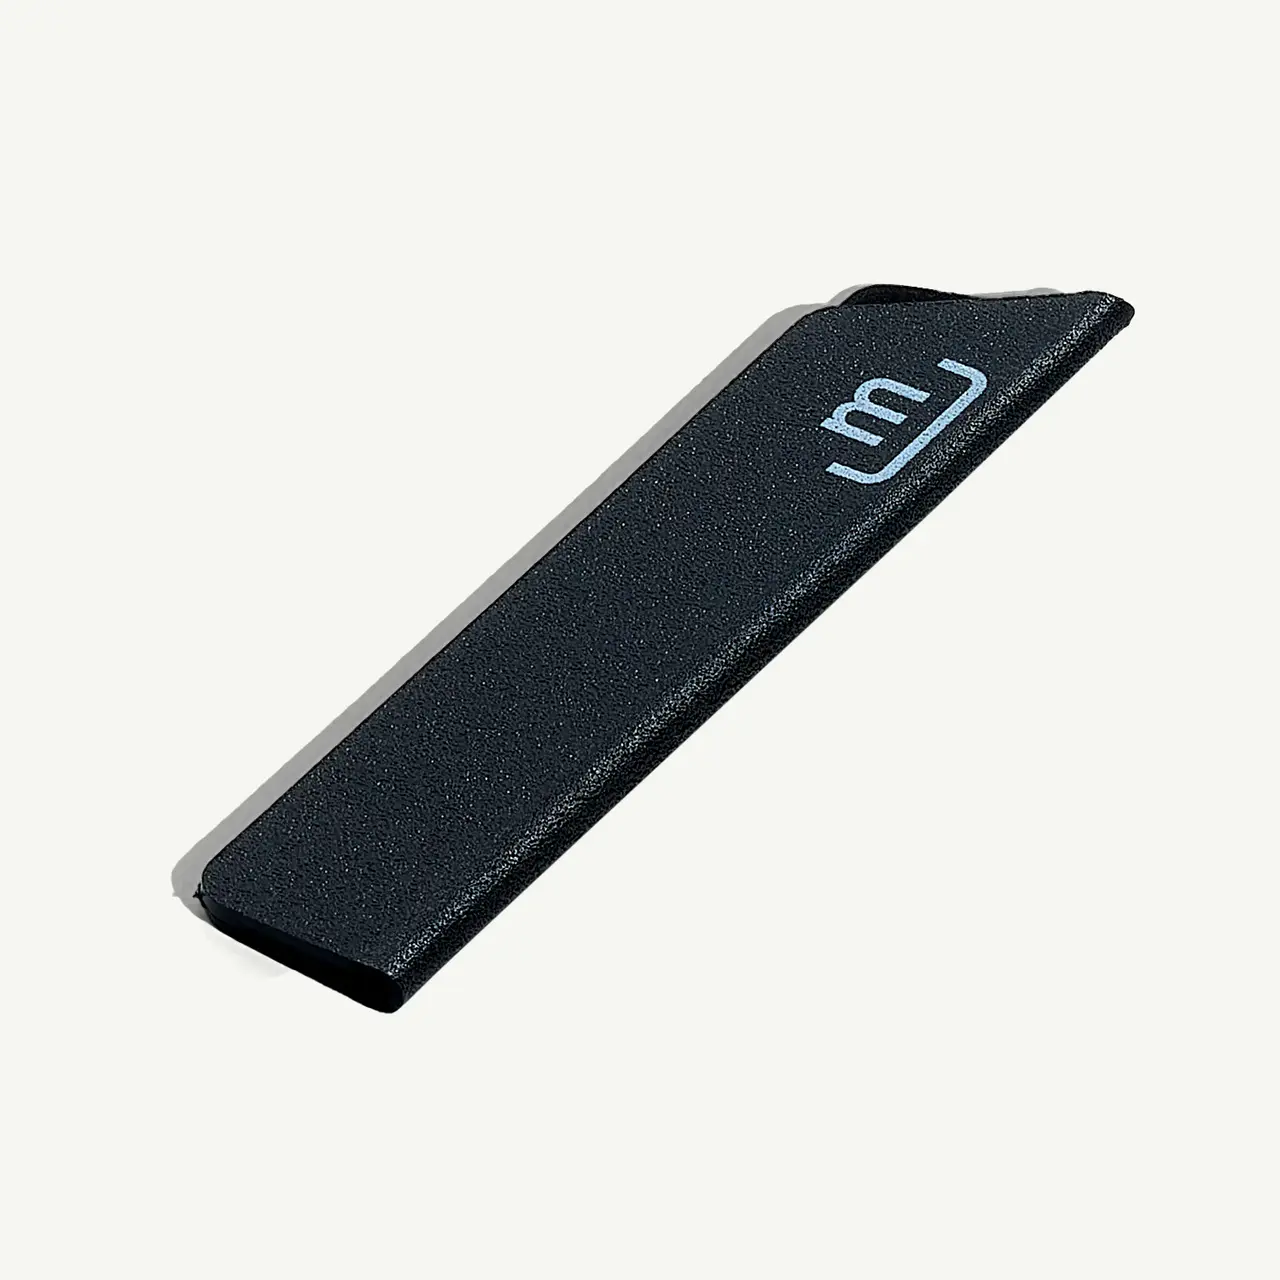 A black Juul e-cigarette device with the brand's logo on a gray background.